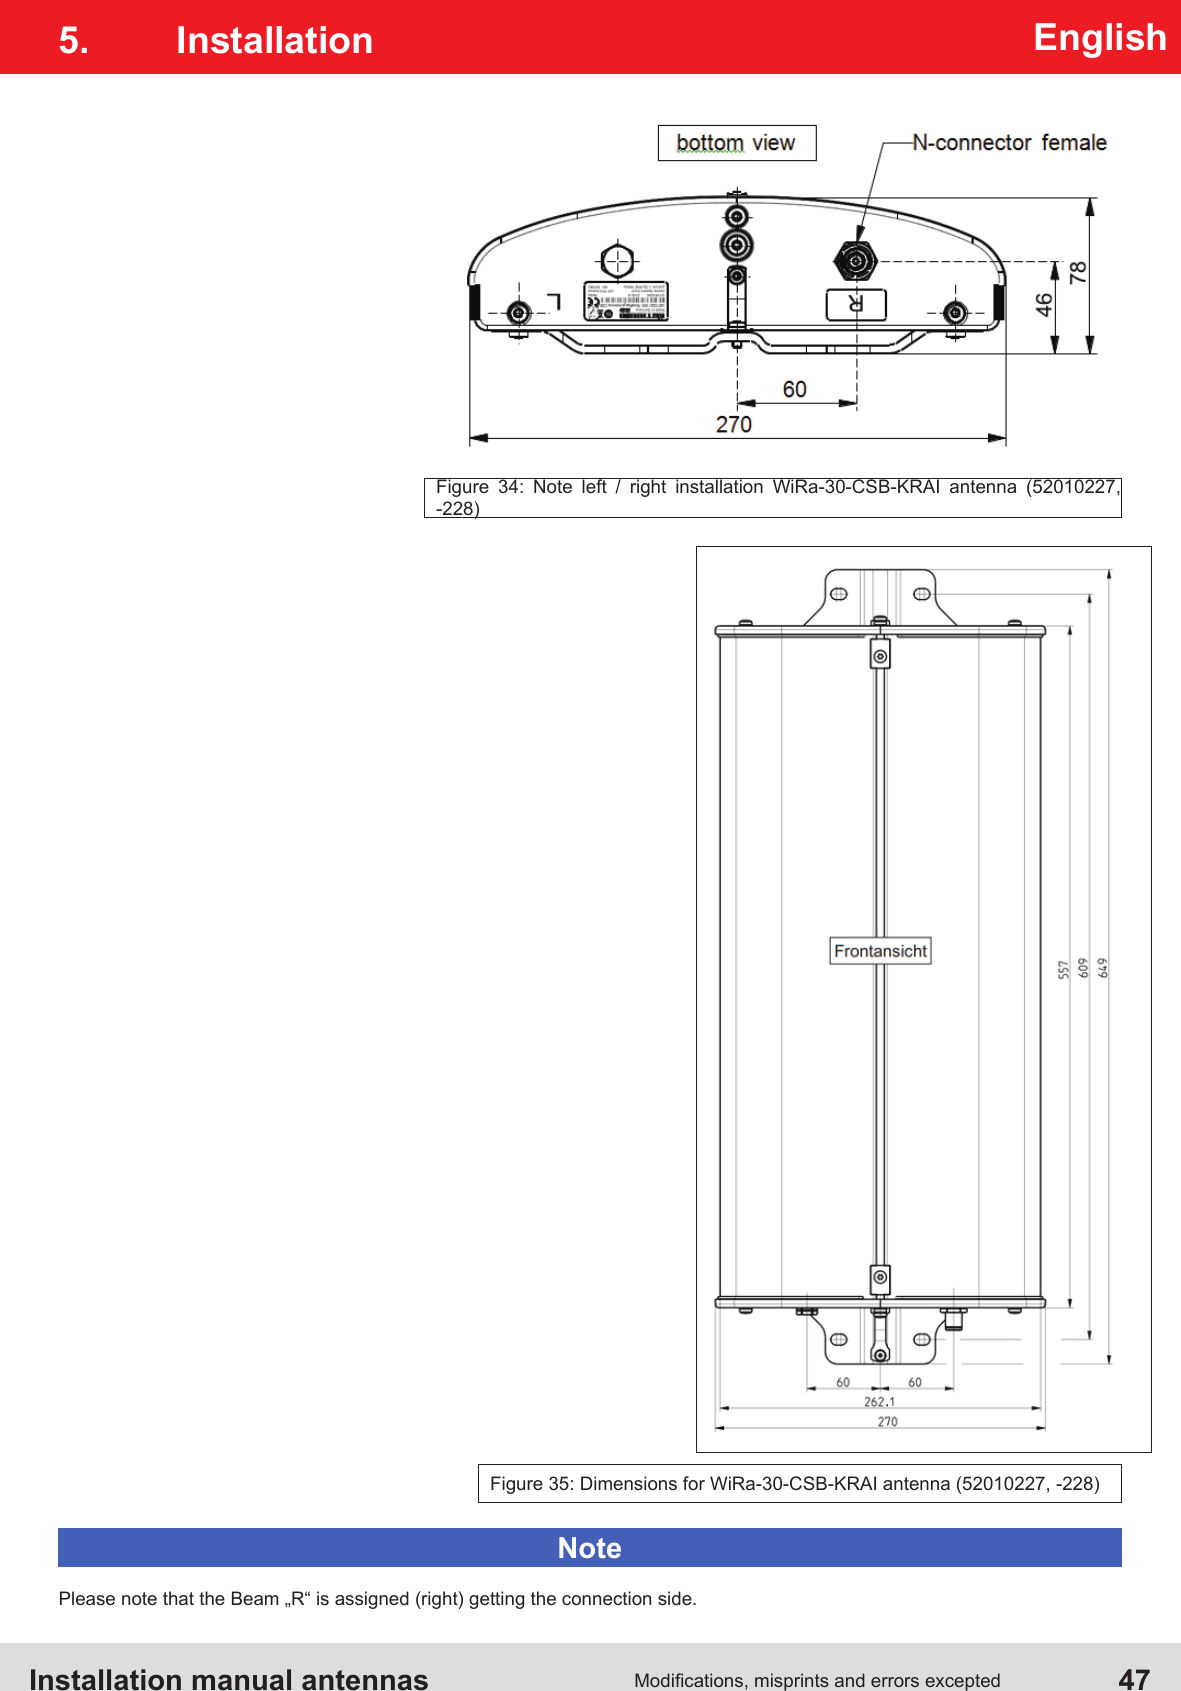 Installation manual antennas   47Modications, misprints and errors exceptedEnglishFigure 35: Dimensions for WiRa-30-CSB-KRAI antenna (52010227, -228)Figure 34: Note left / right installation WiRa-30-CSB-KRAI antenna (52010227, -228)5. InstallationPlease note that the Beam „R“ is assigned (right) getting the connection side.Note